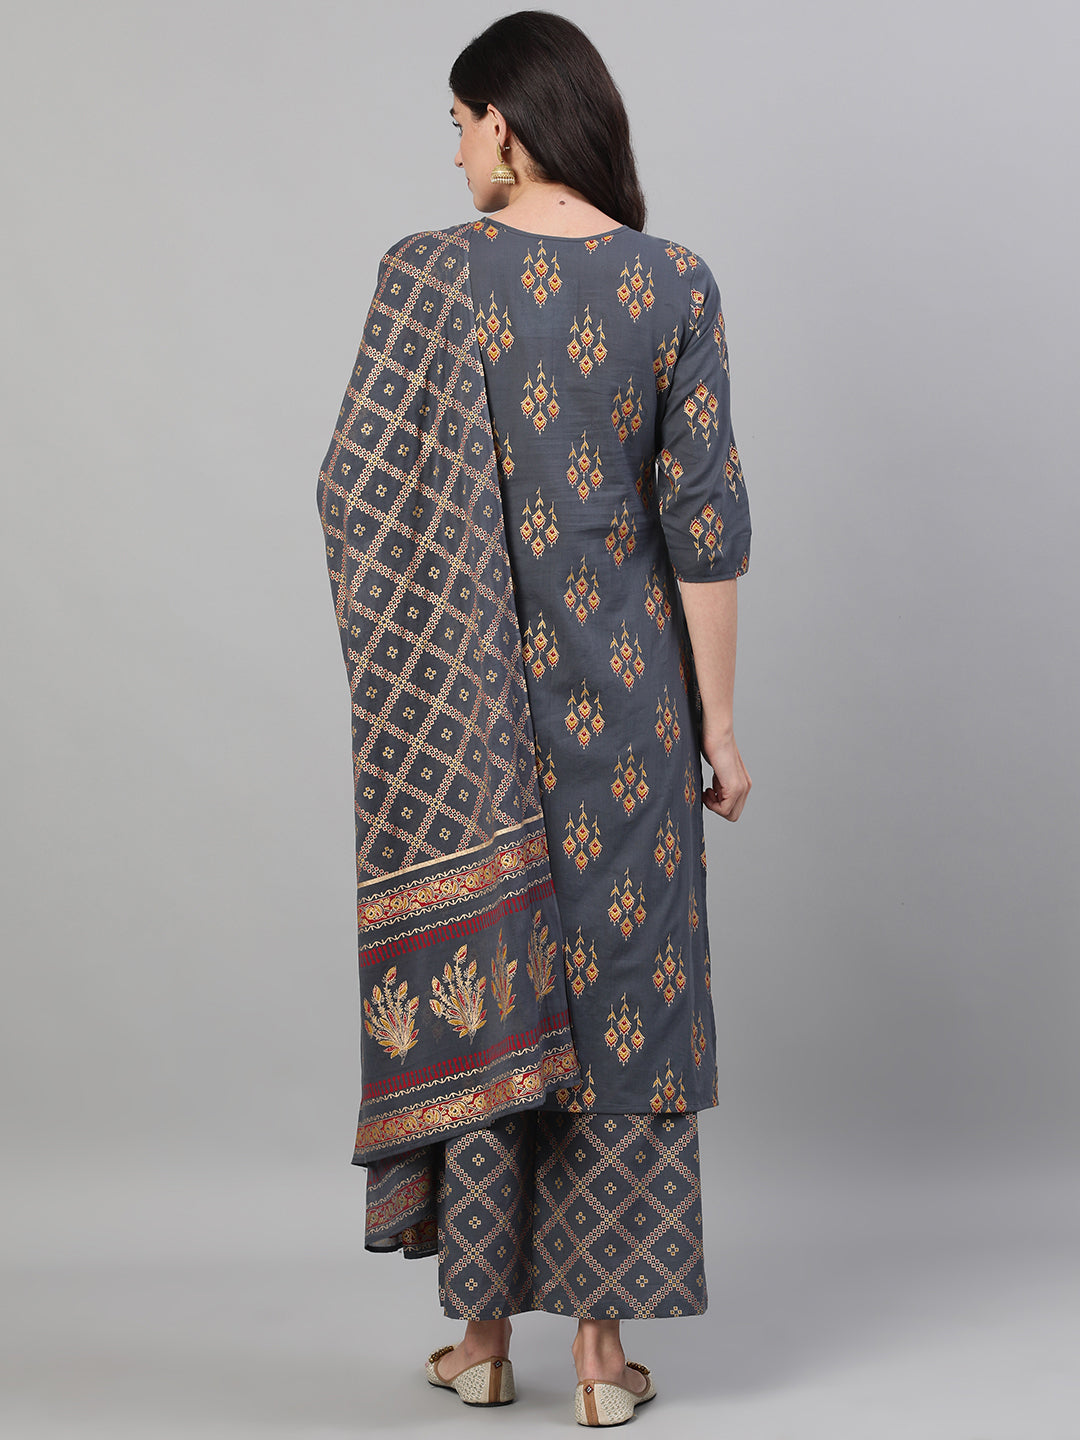 Women's Steel Grey Gold Printed Three-Quarter Sleeves Straight Kurta With Palazzo and Dupatta with pockets And Face Mask - Taantav